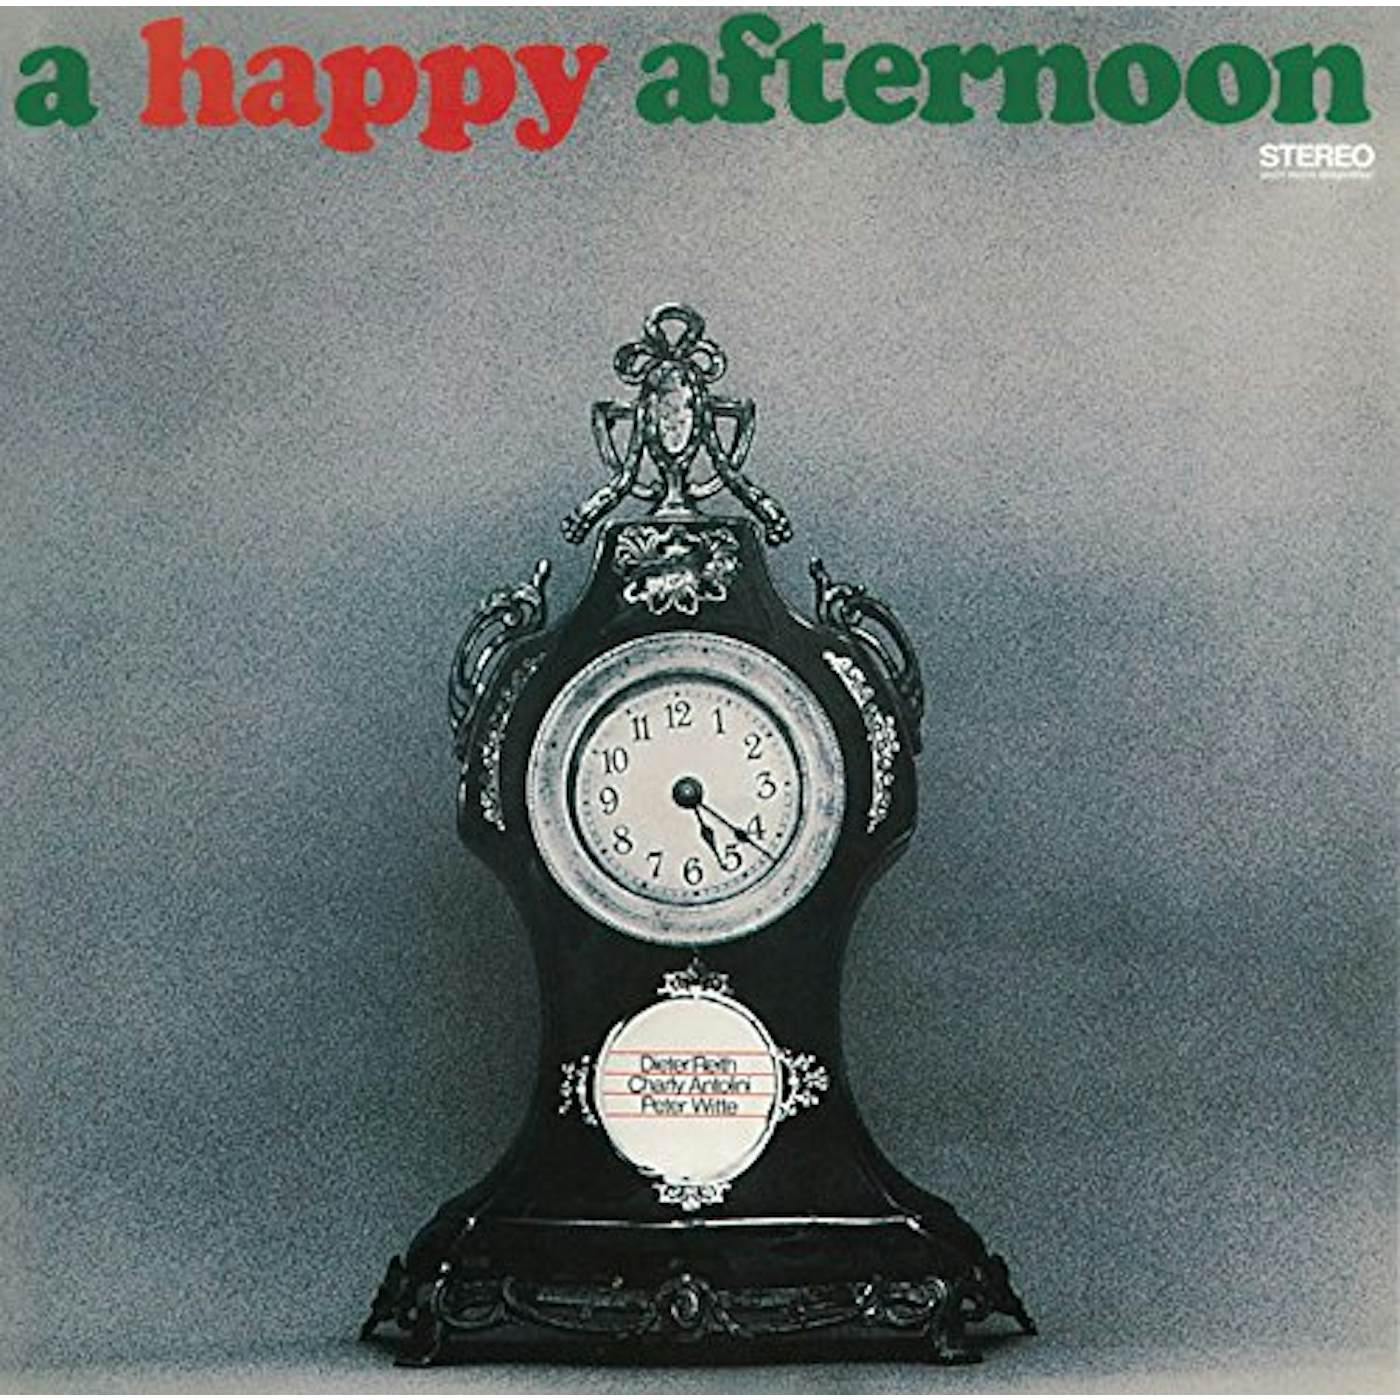 Dieter Reith HAPPY AFTERNOON CD